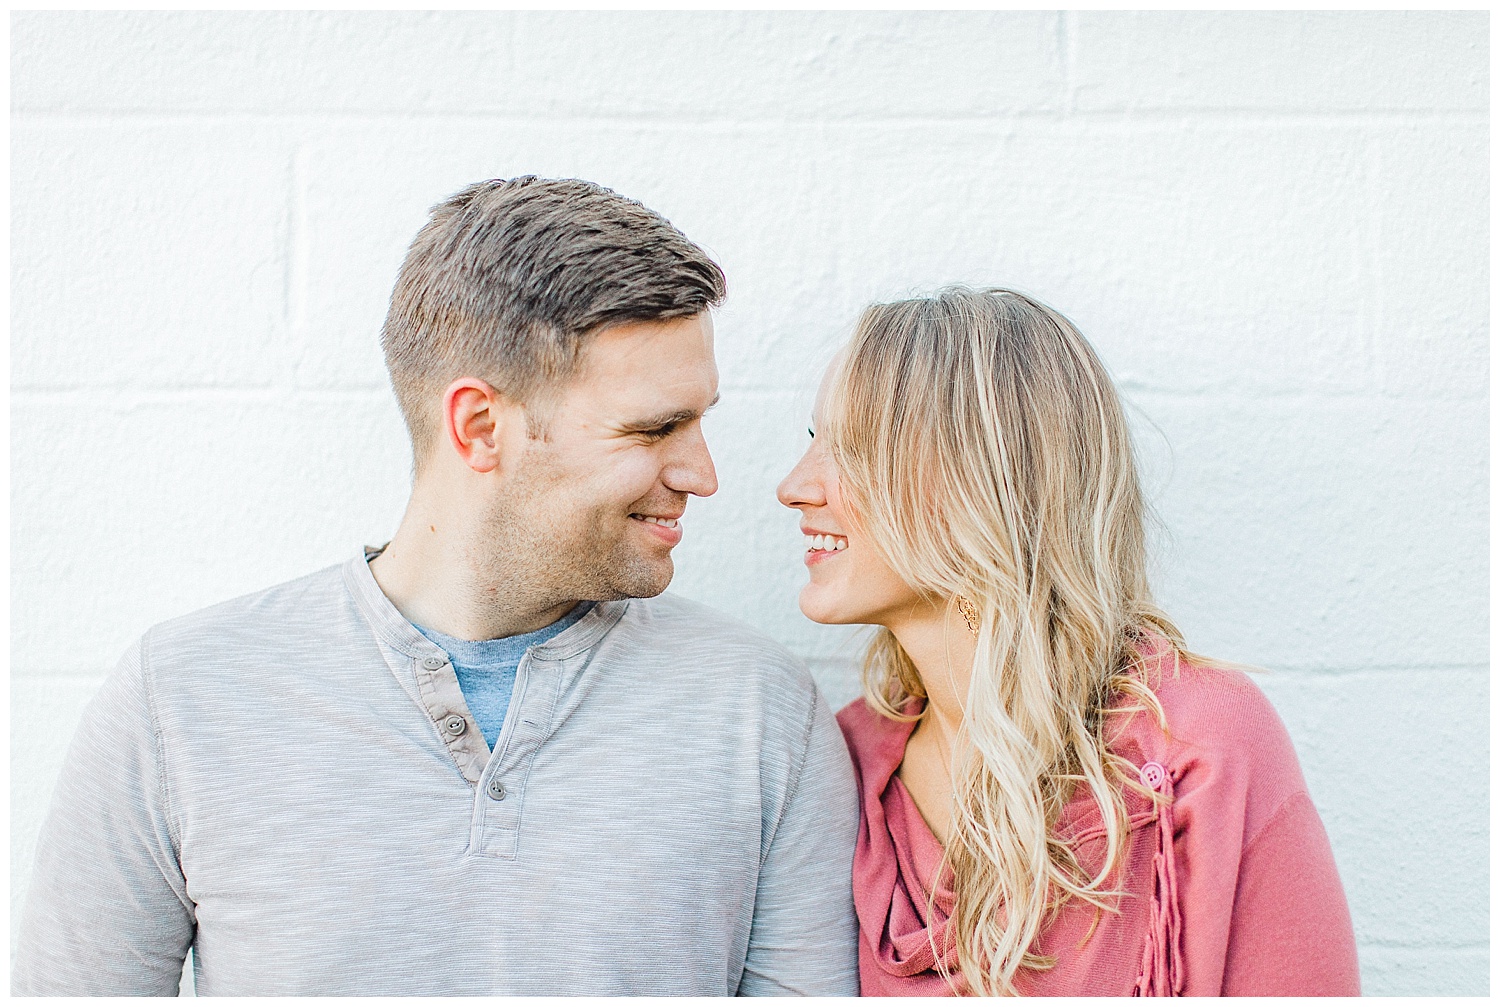 ERC_1067_Downtown Nashville Engagement Session at Barista Parlor | Emma Rose Company Wedding Photographer | Outfit Inspiration for Engagement Session | Kindred Light and Airy Photographer.jpg